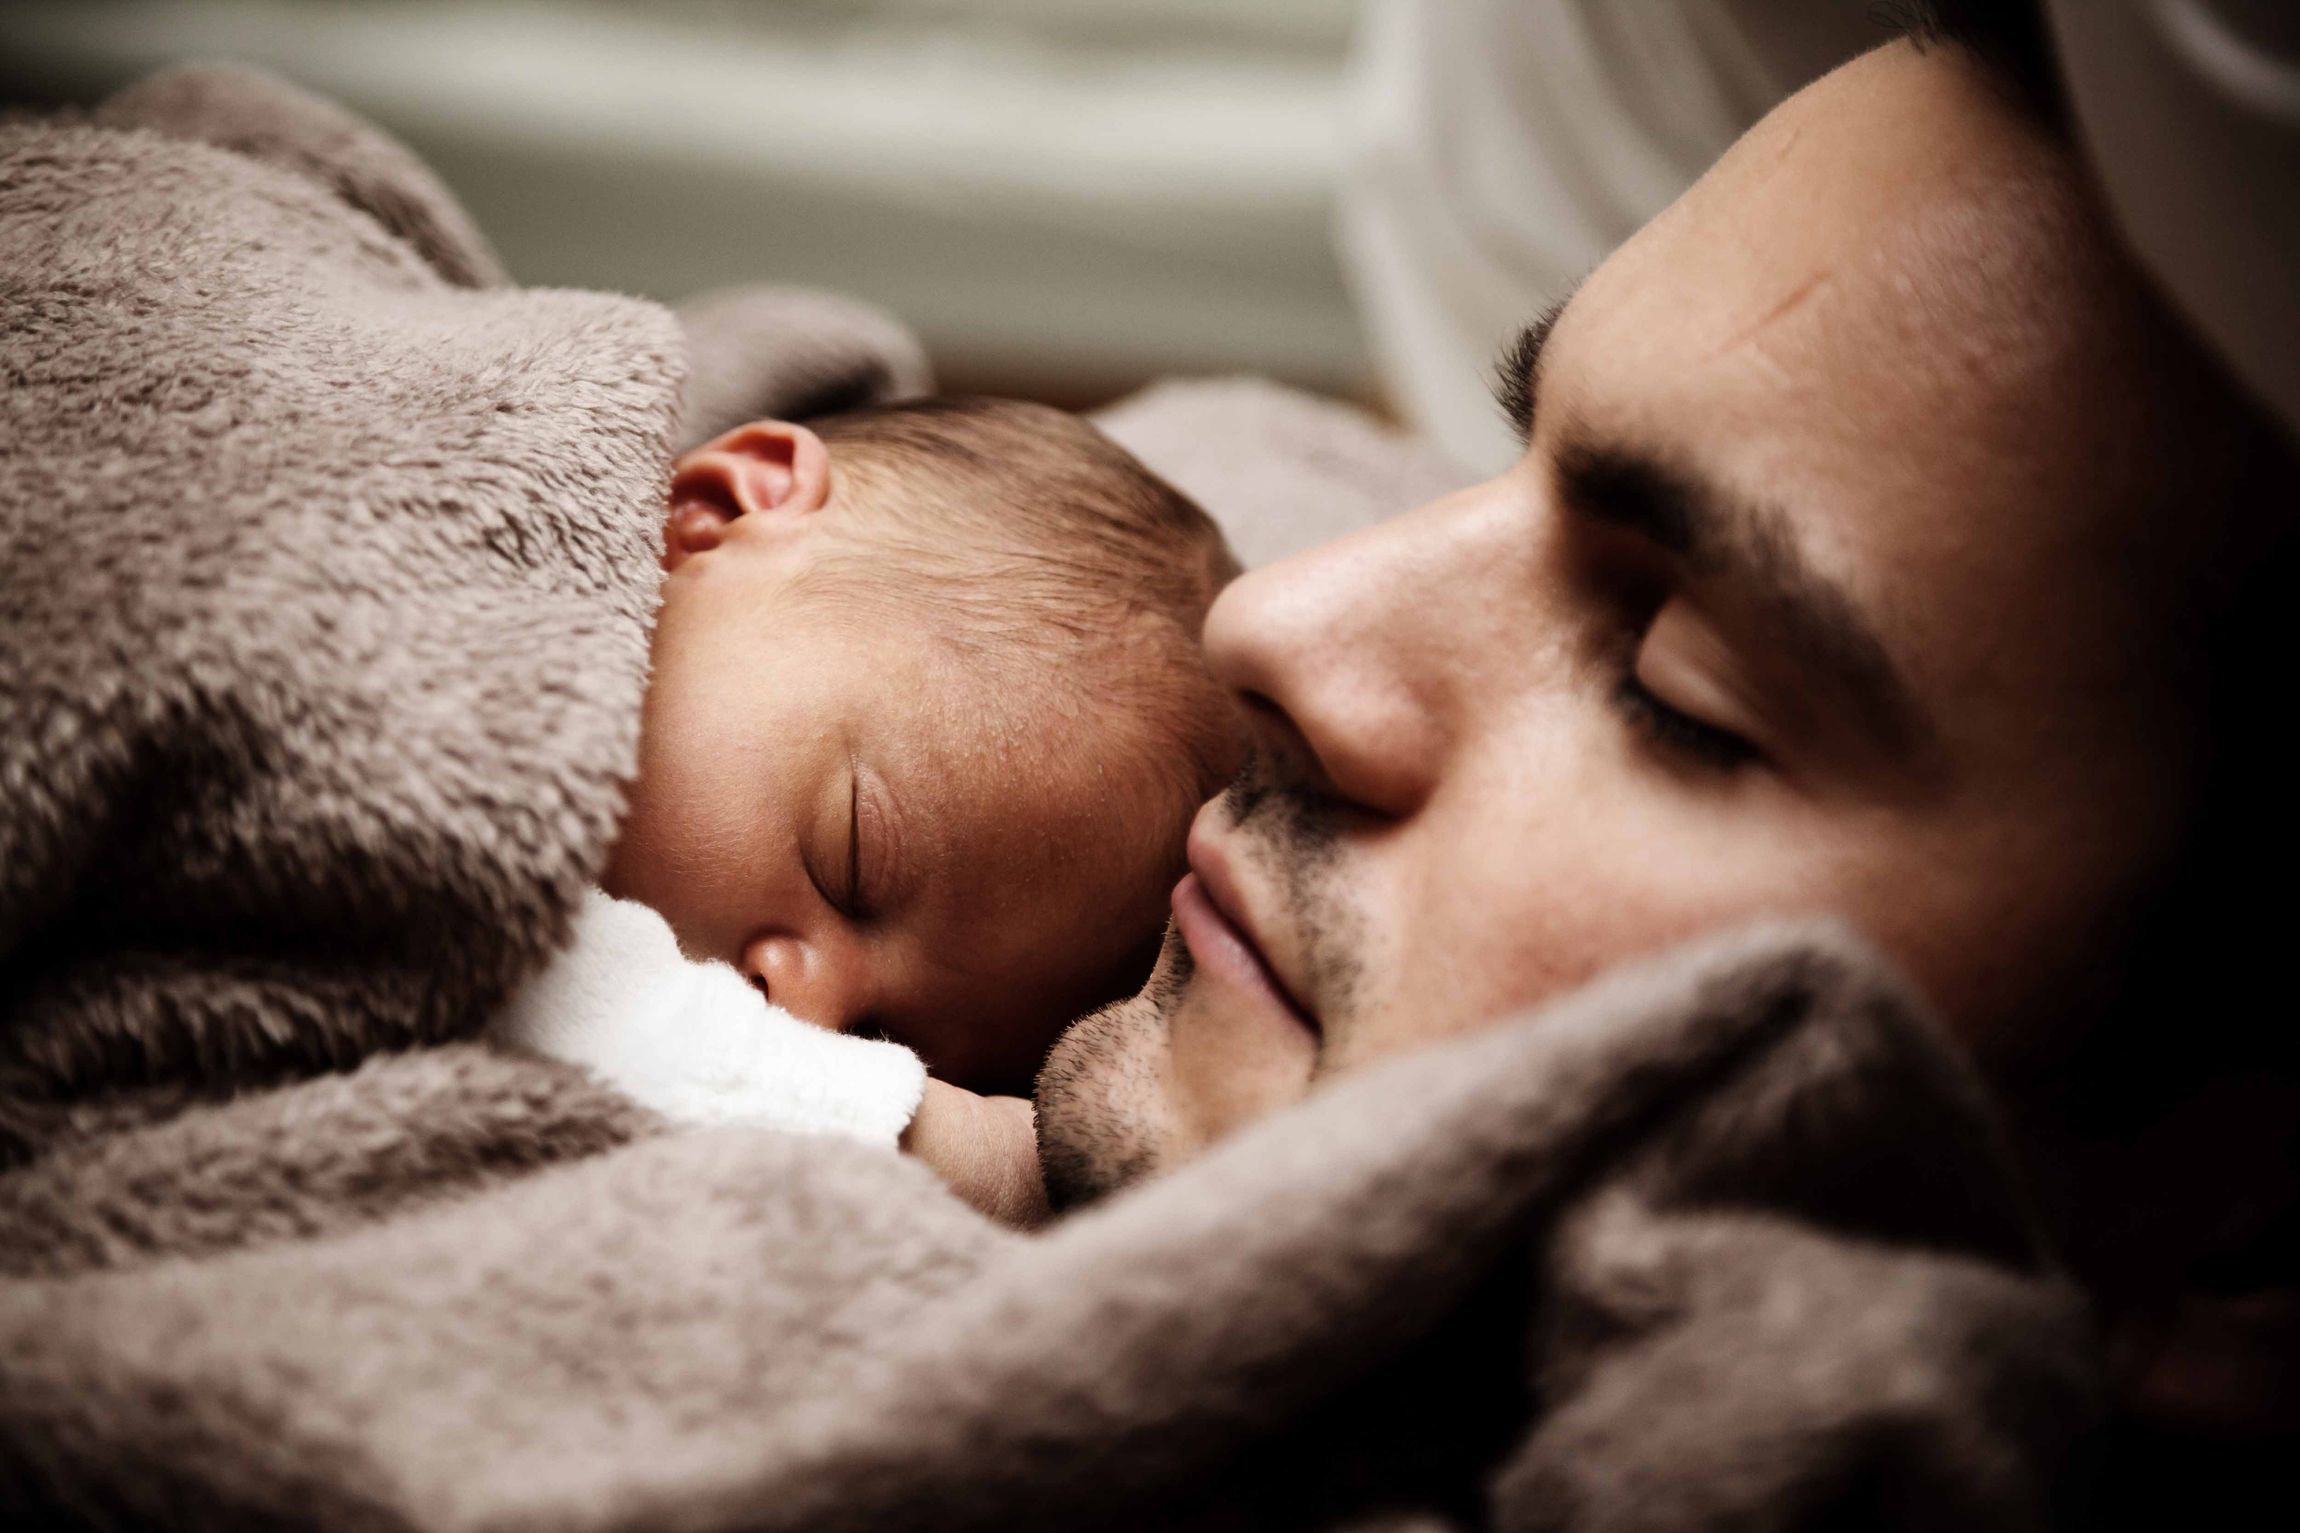 Soutport vasectomy reversal patient sleeping with a cute baby